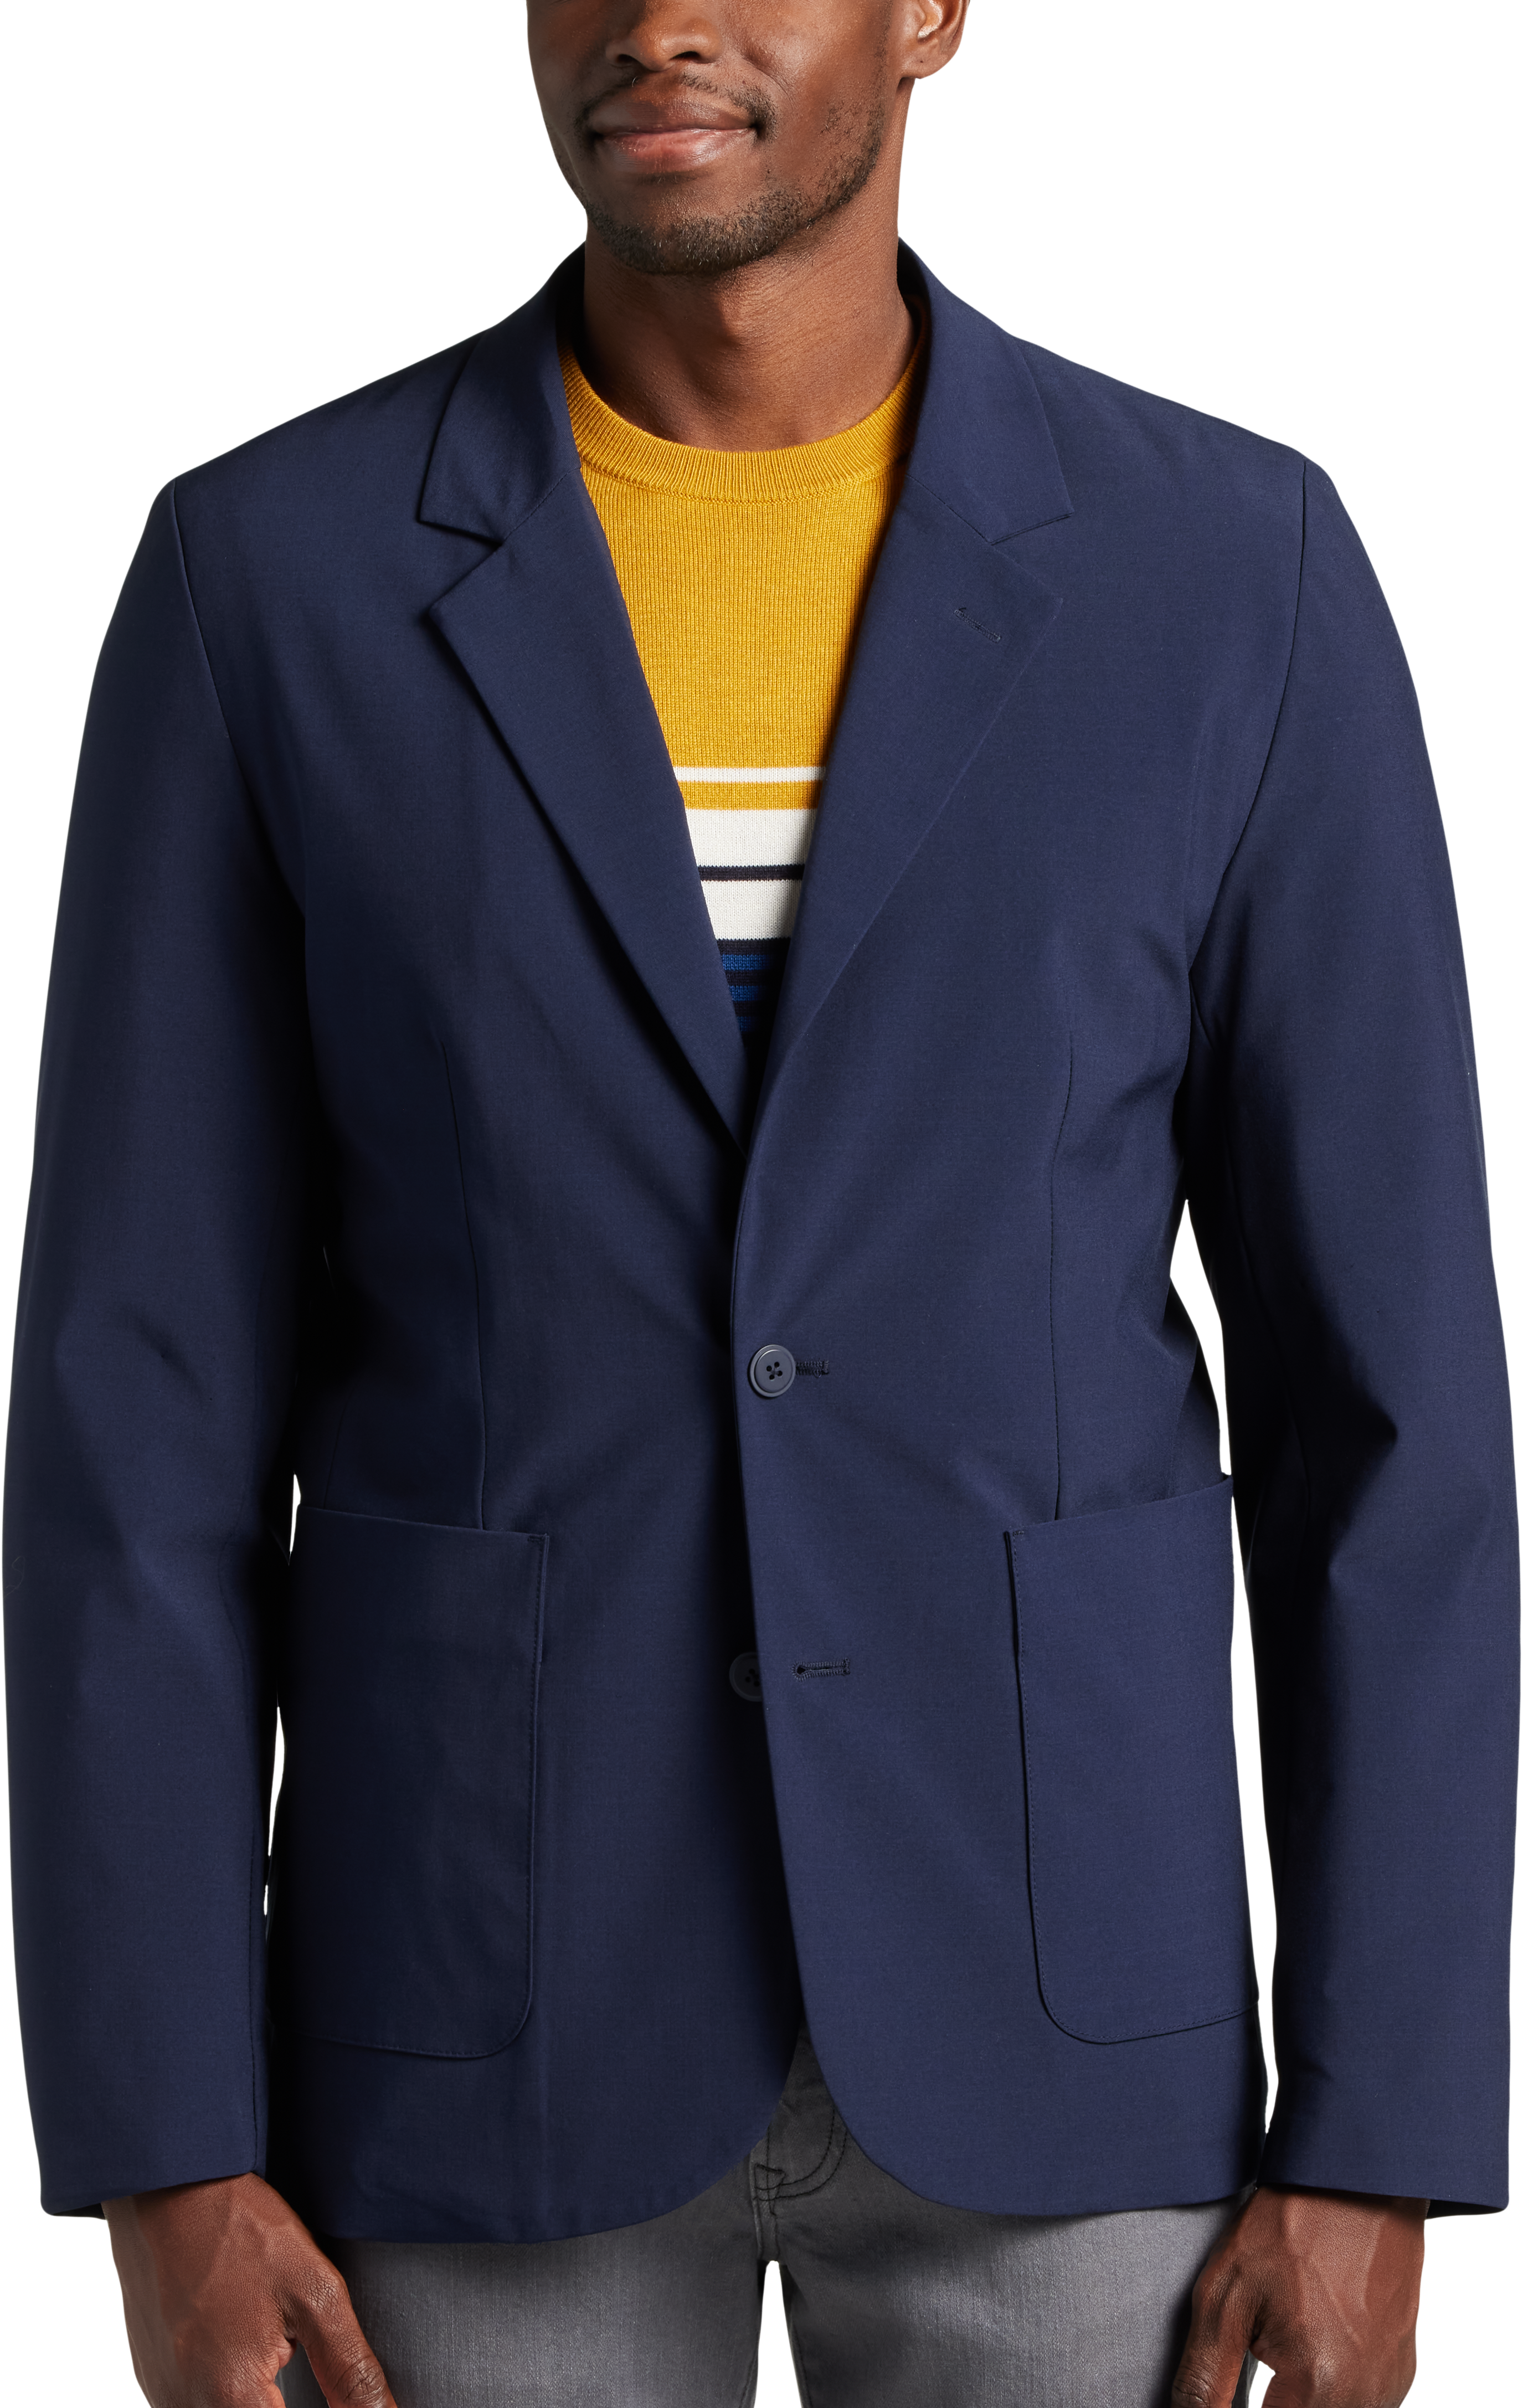 Modern Fit Sport Coat with Hood and Bib